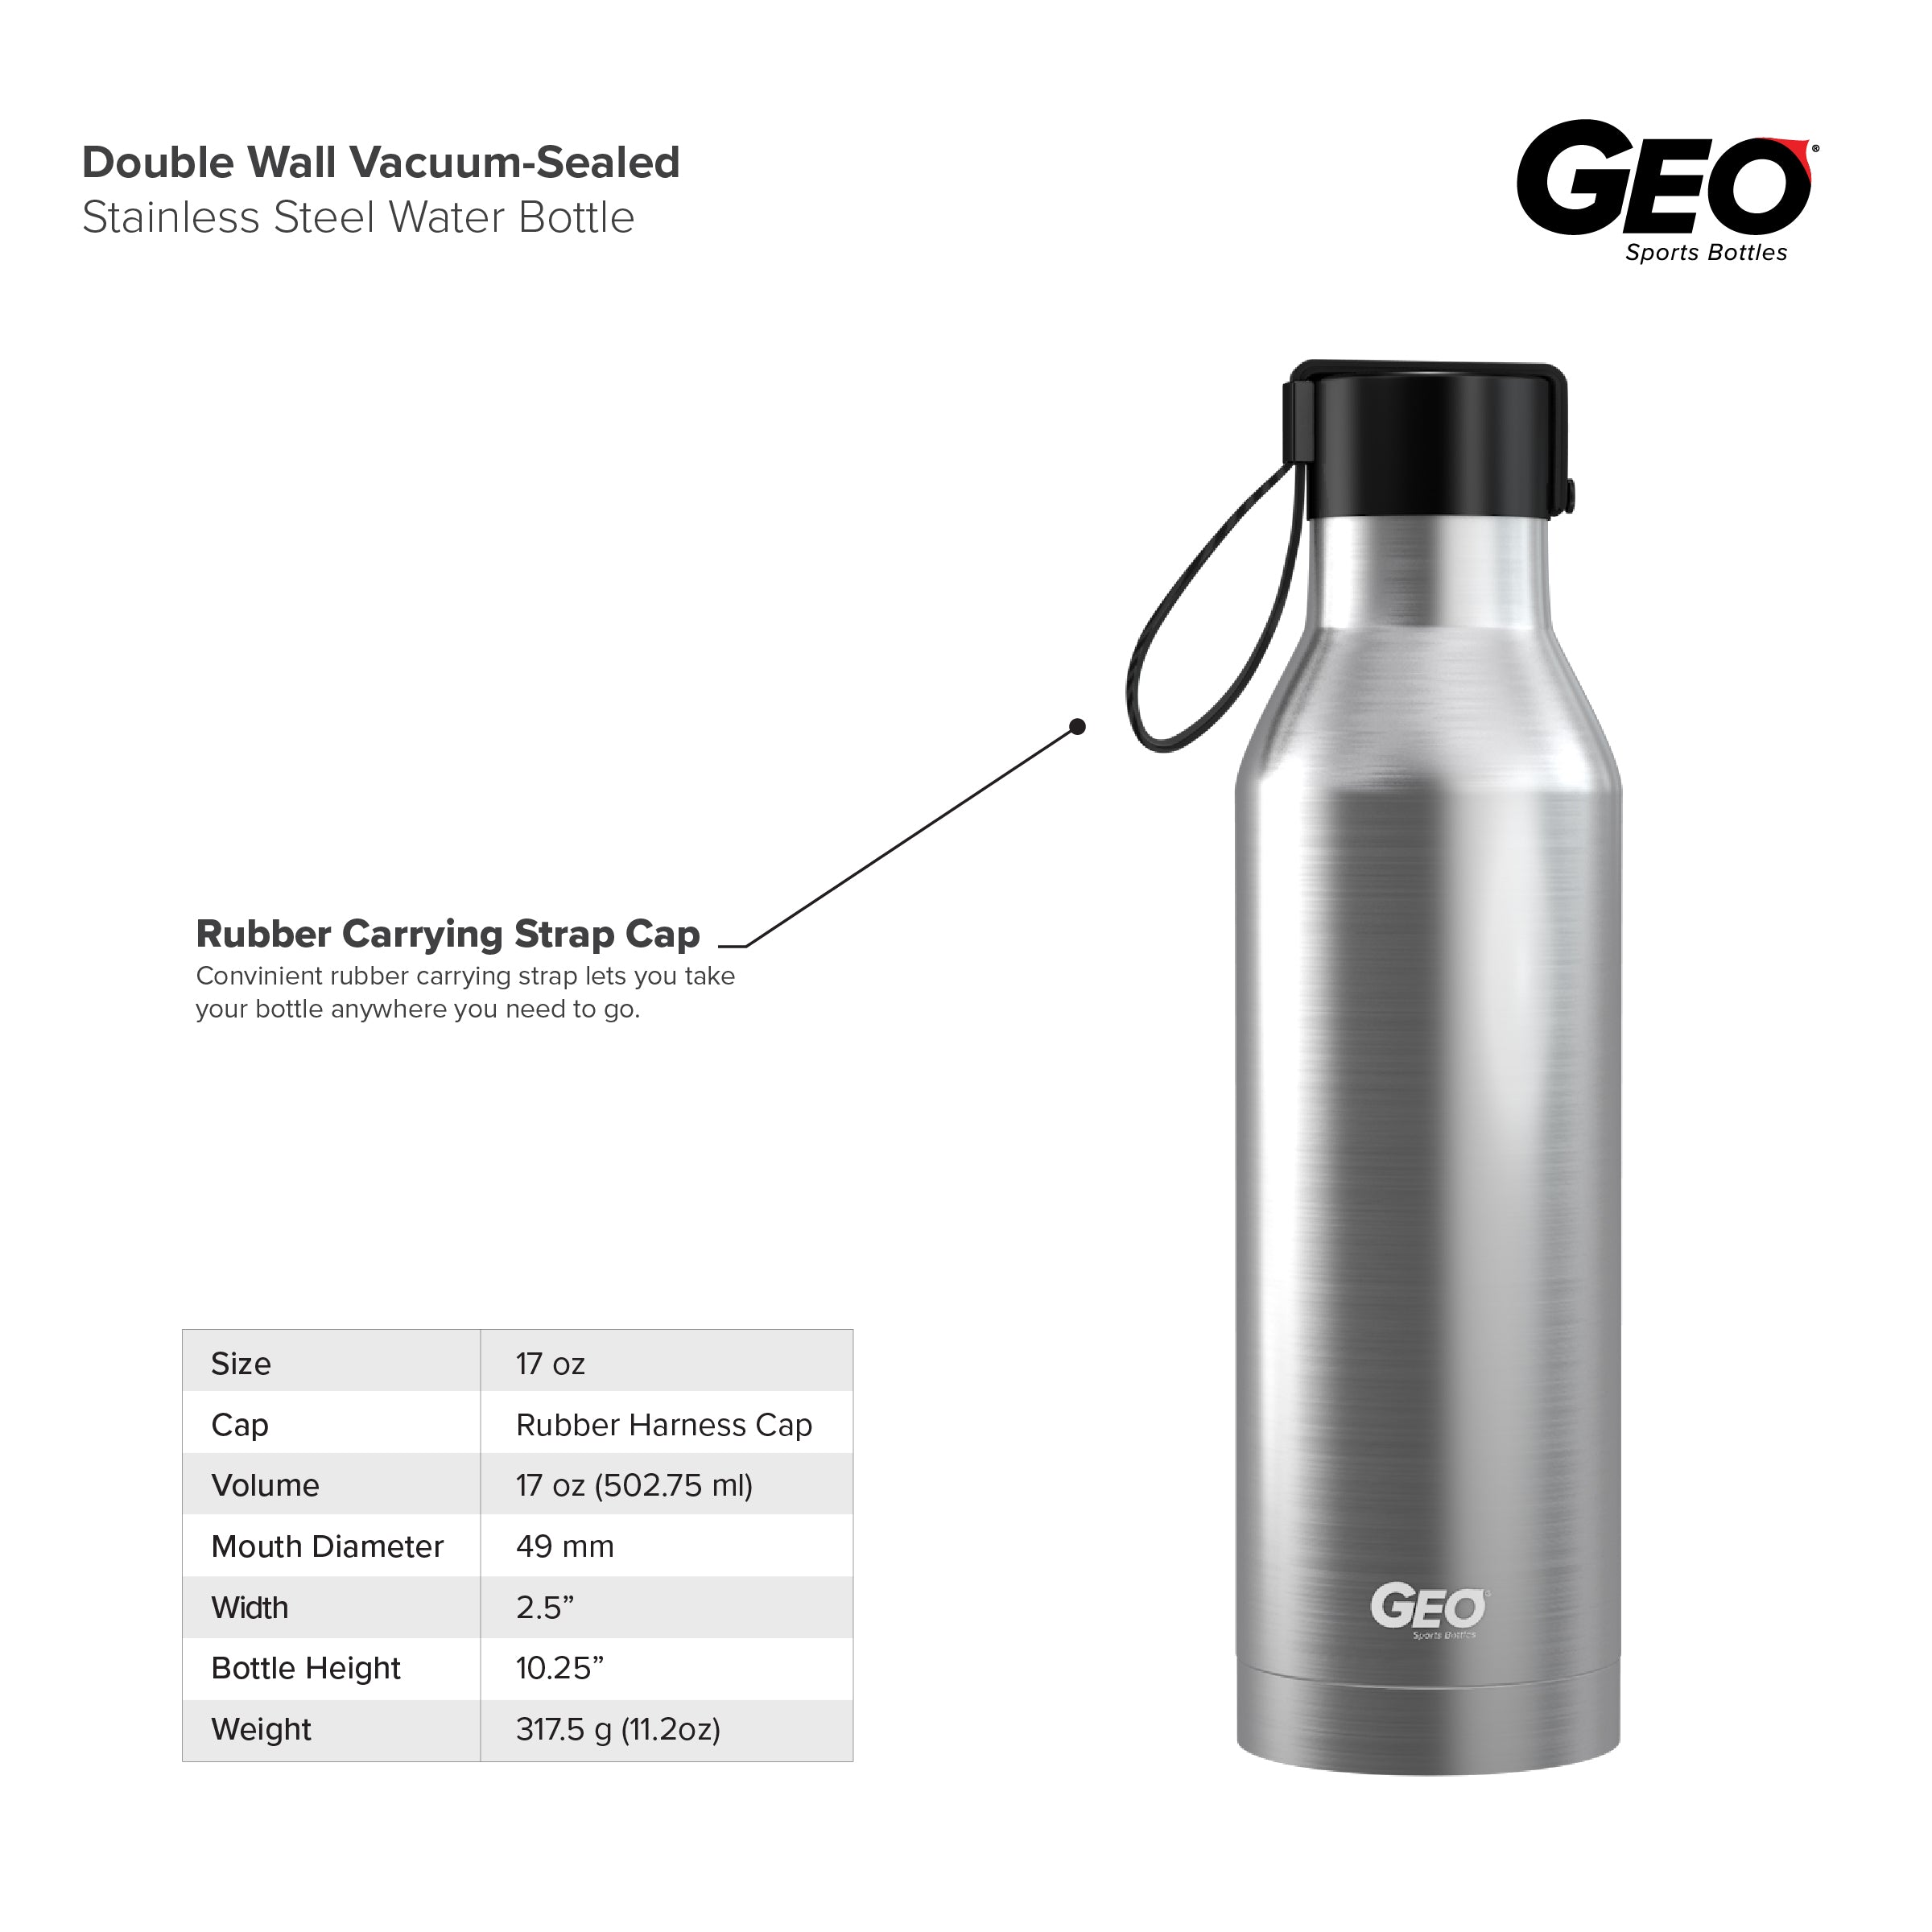 PARACITY Insulated Water Bottle,17 oz Stainless Steel Thermos